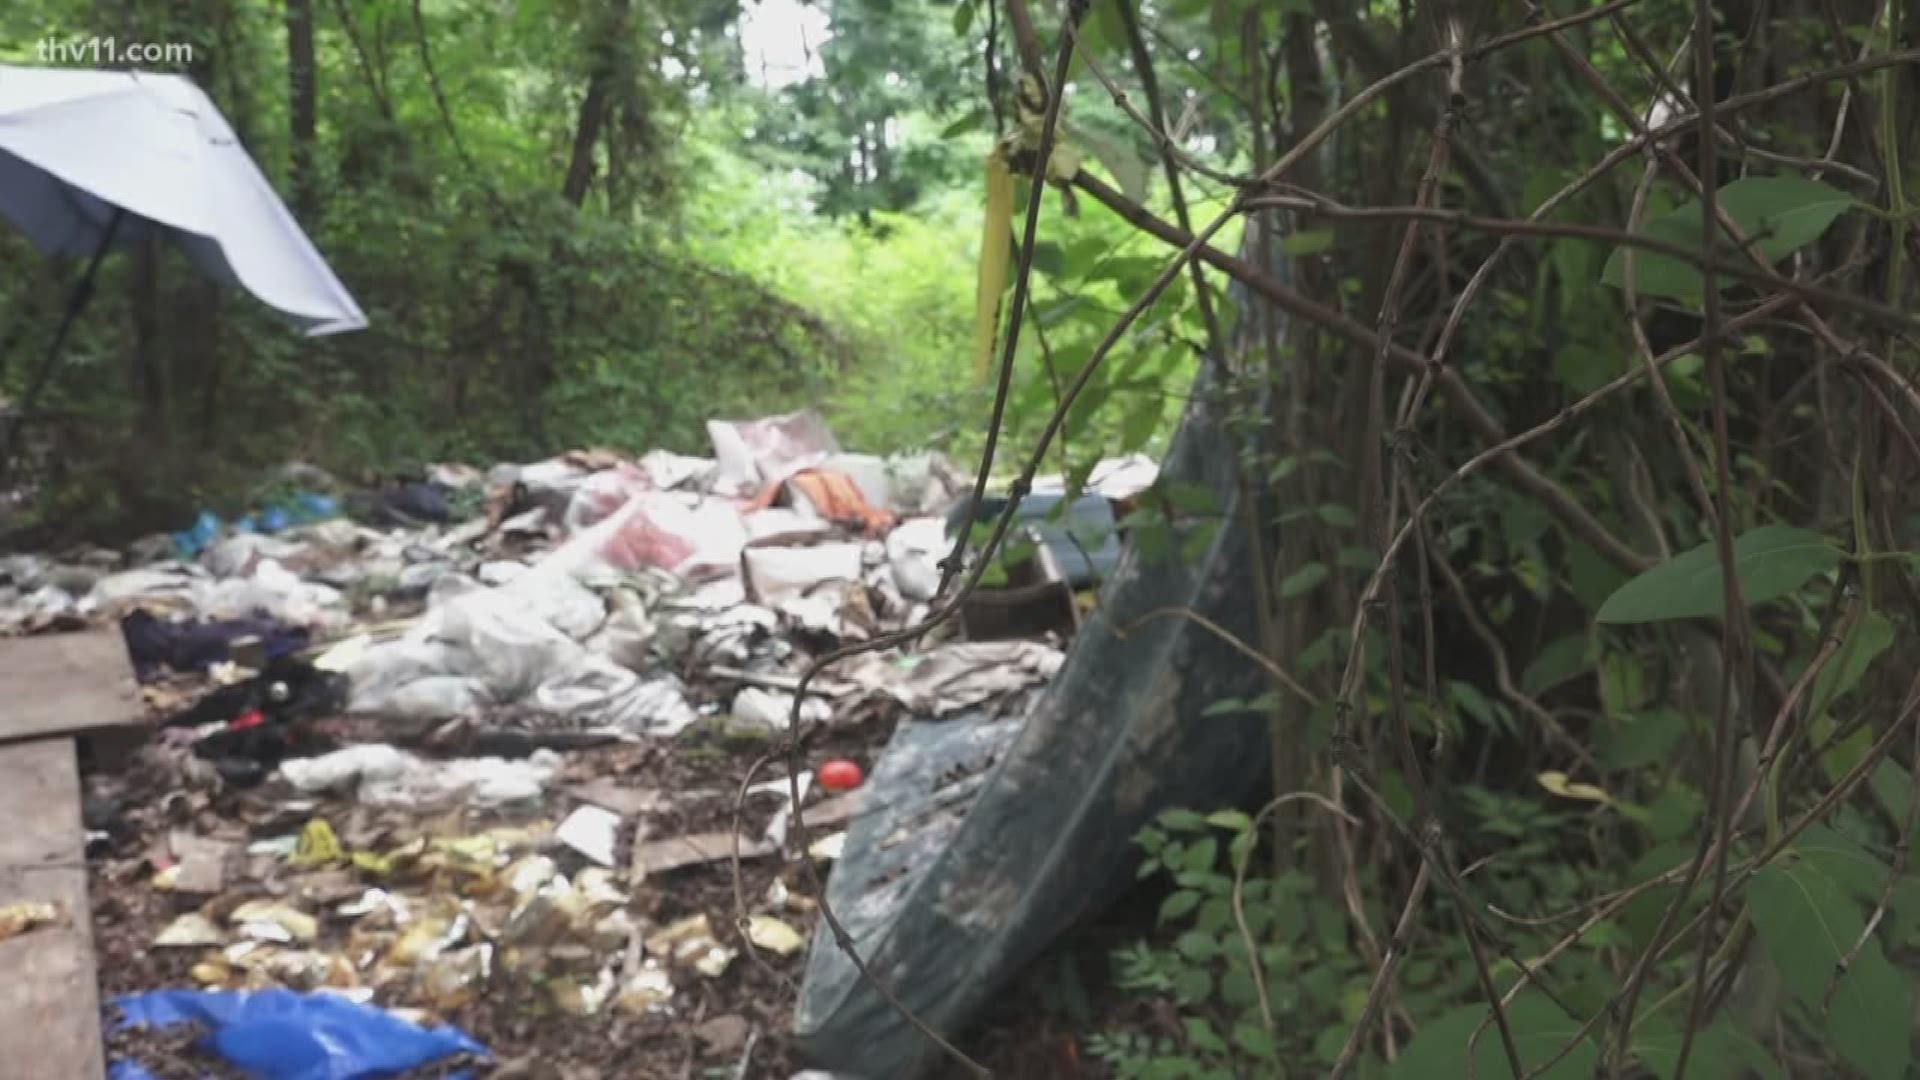 Though the city of Little Rock has made promises to clean these sites, some areas are still full of litter.